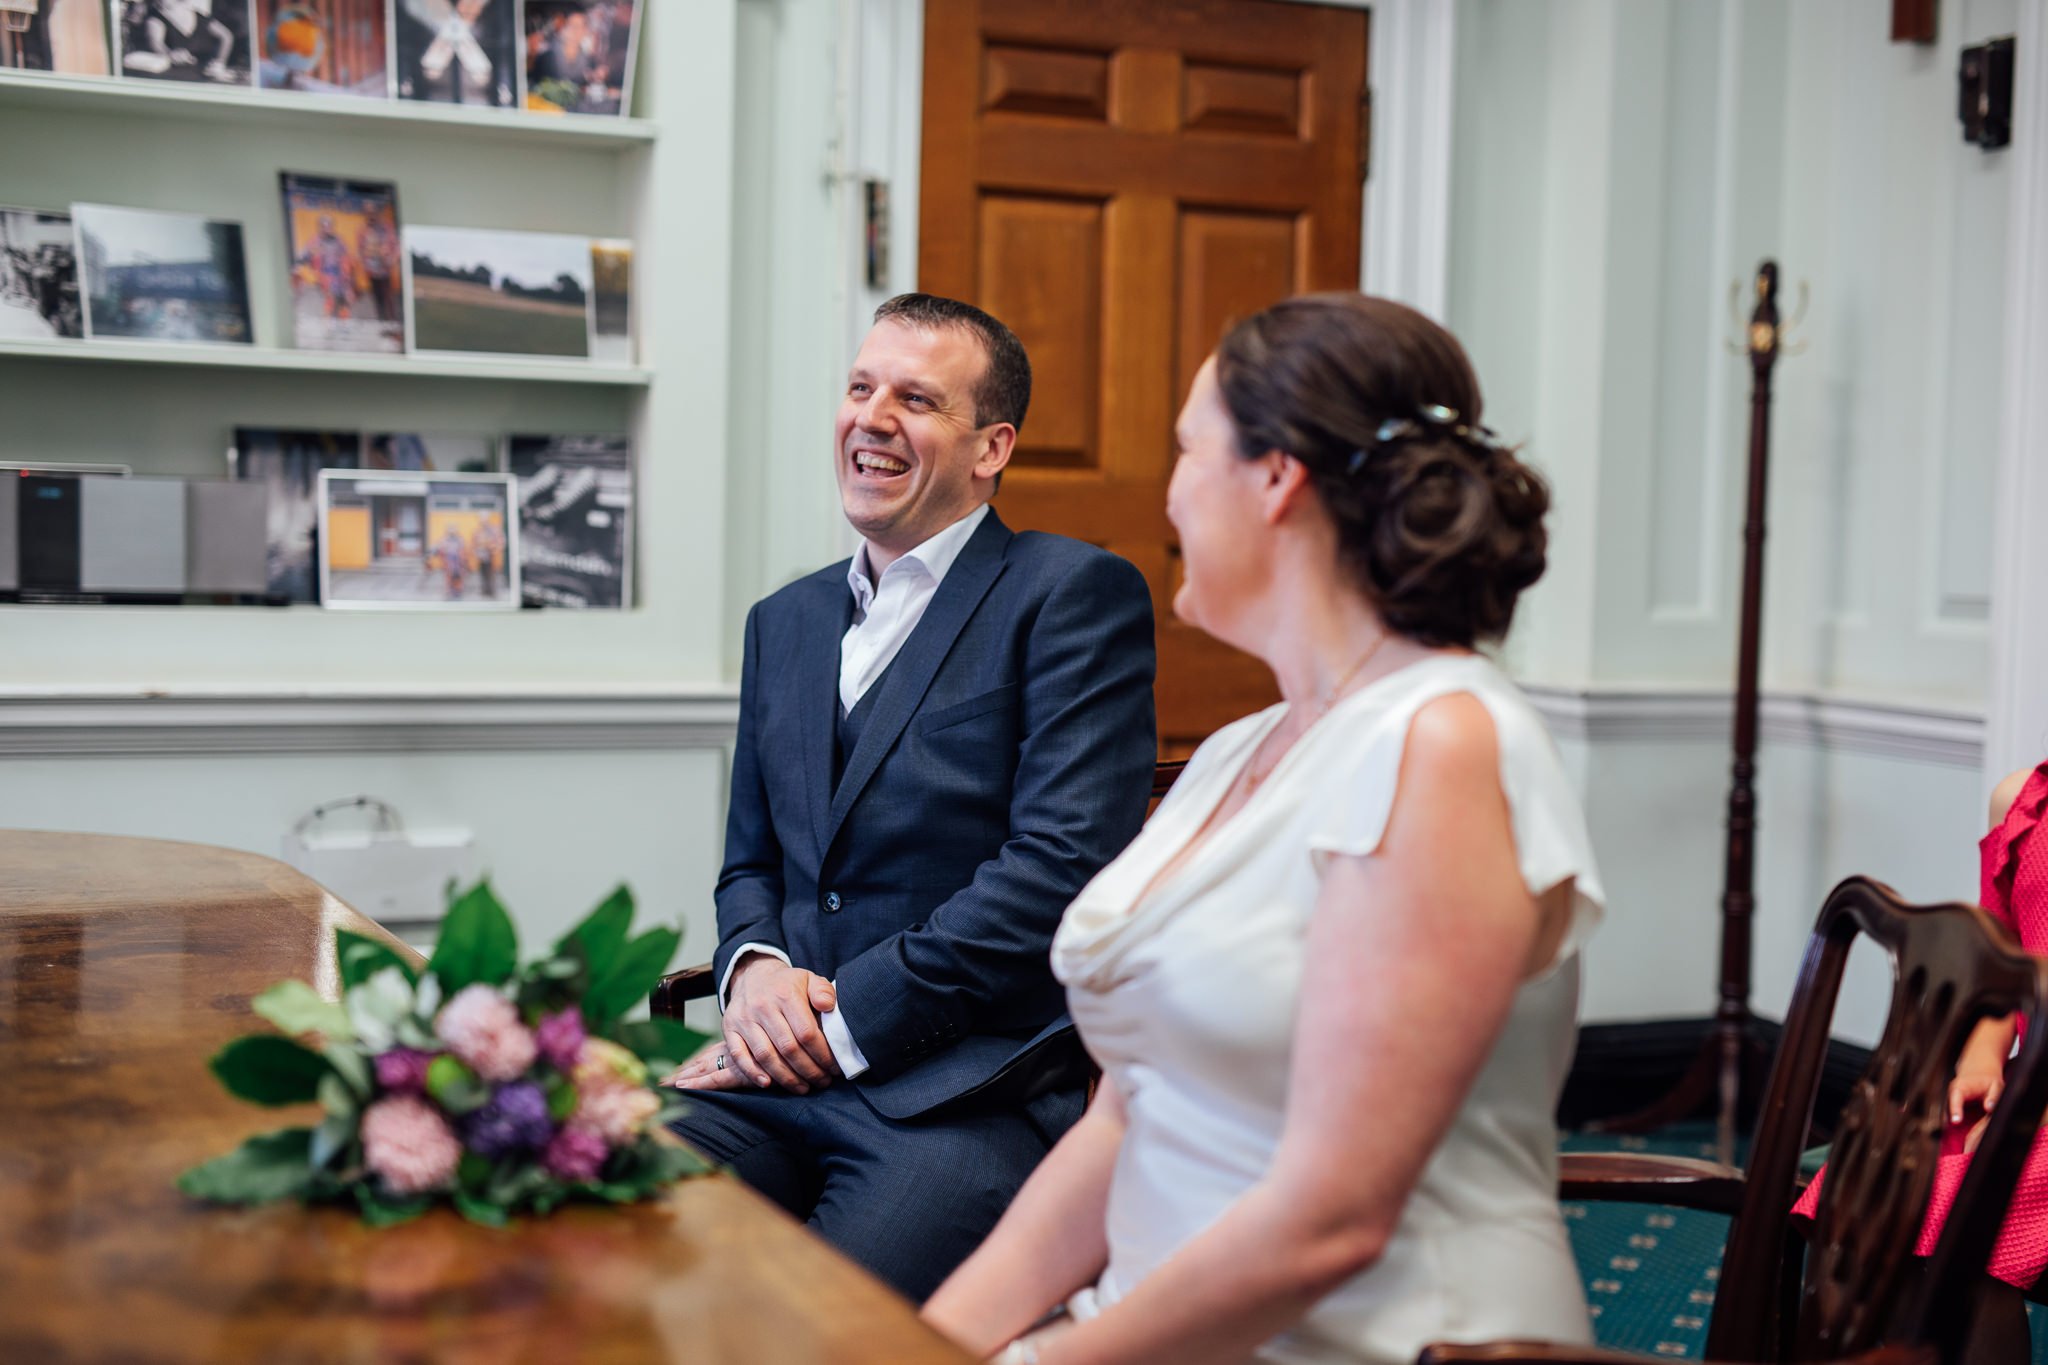  Groom smiling after the wedding ceremony at Camden Town Hall 